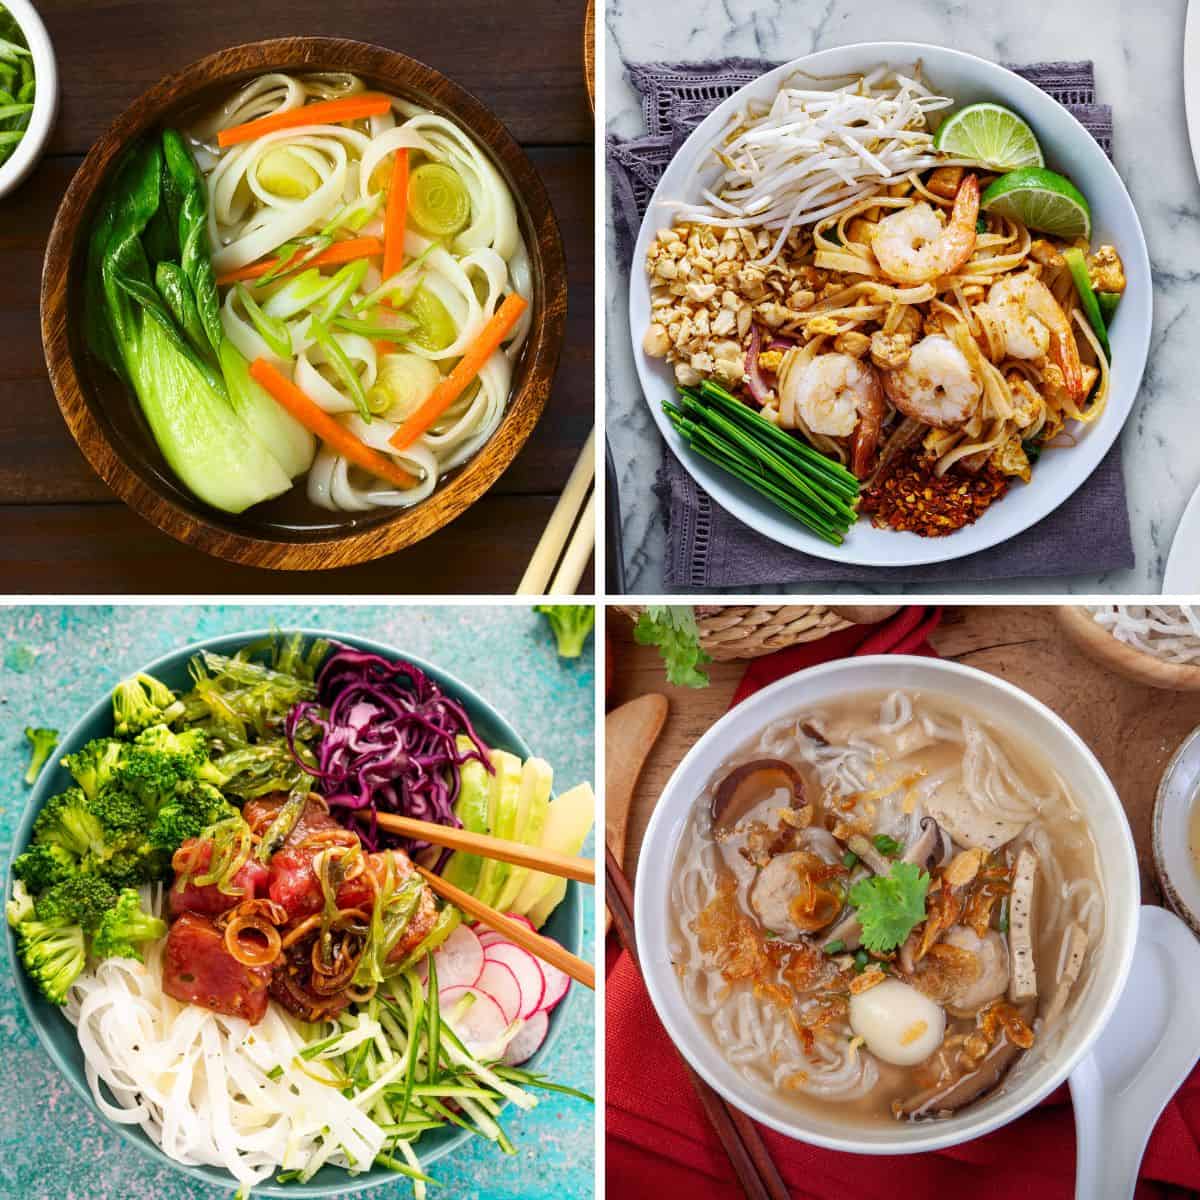 Pictures of rice noodle dishes.